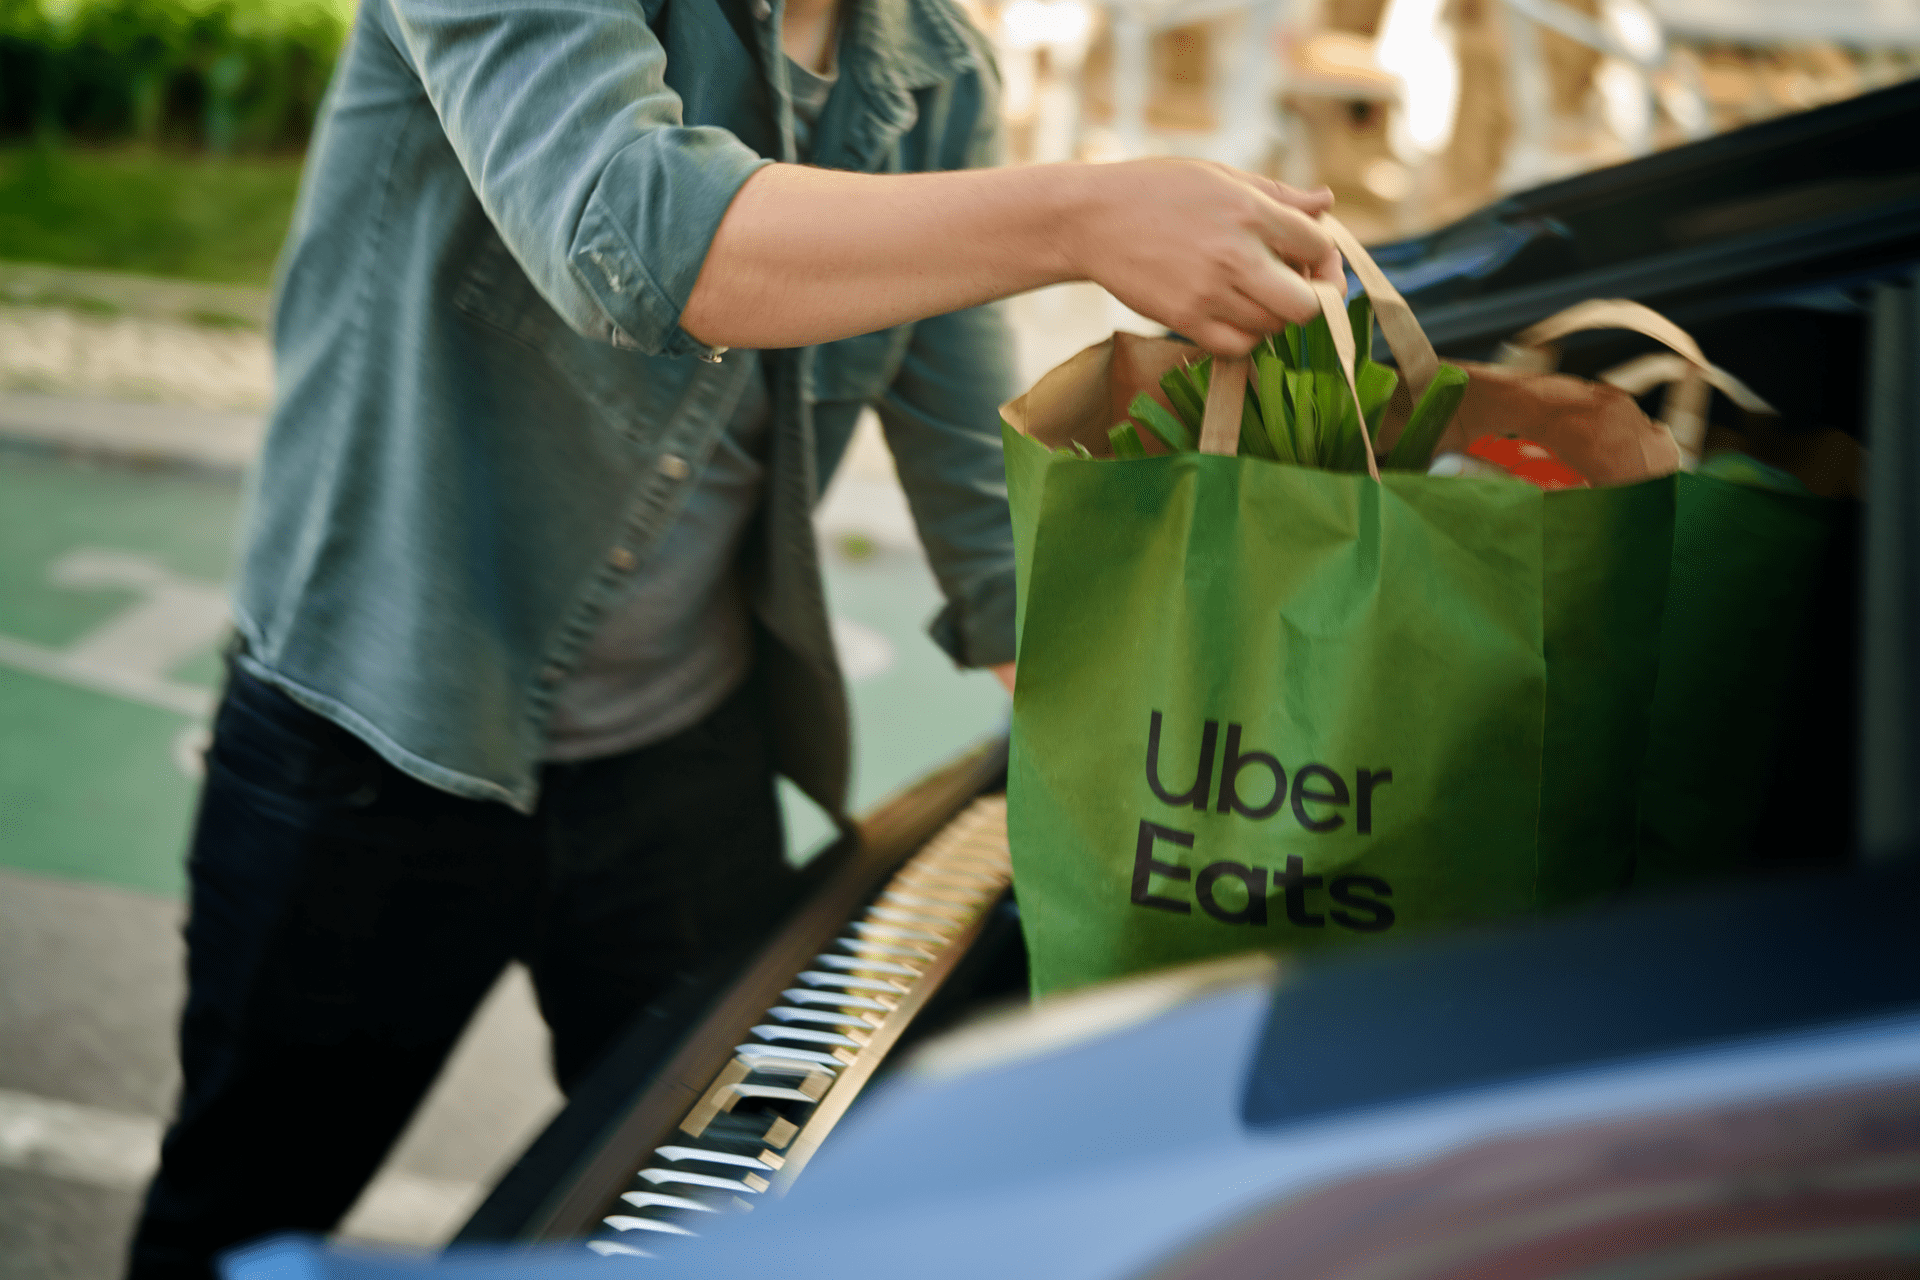 Uber Health Launches Grocery & OTC Item Delivery to Patient Homes Nationwide